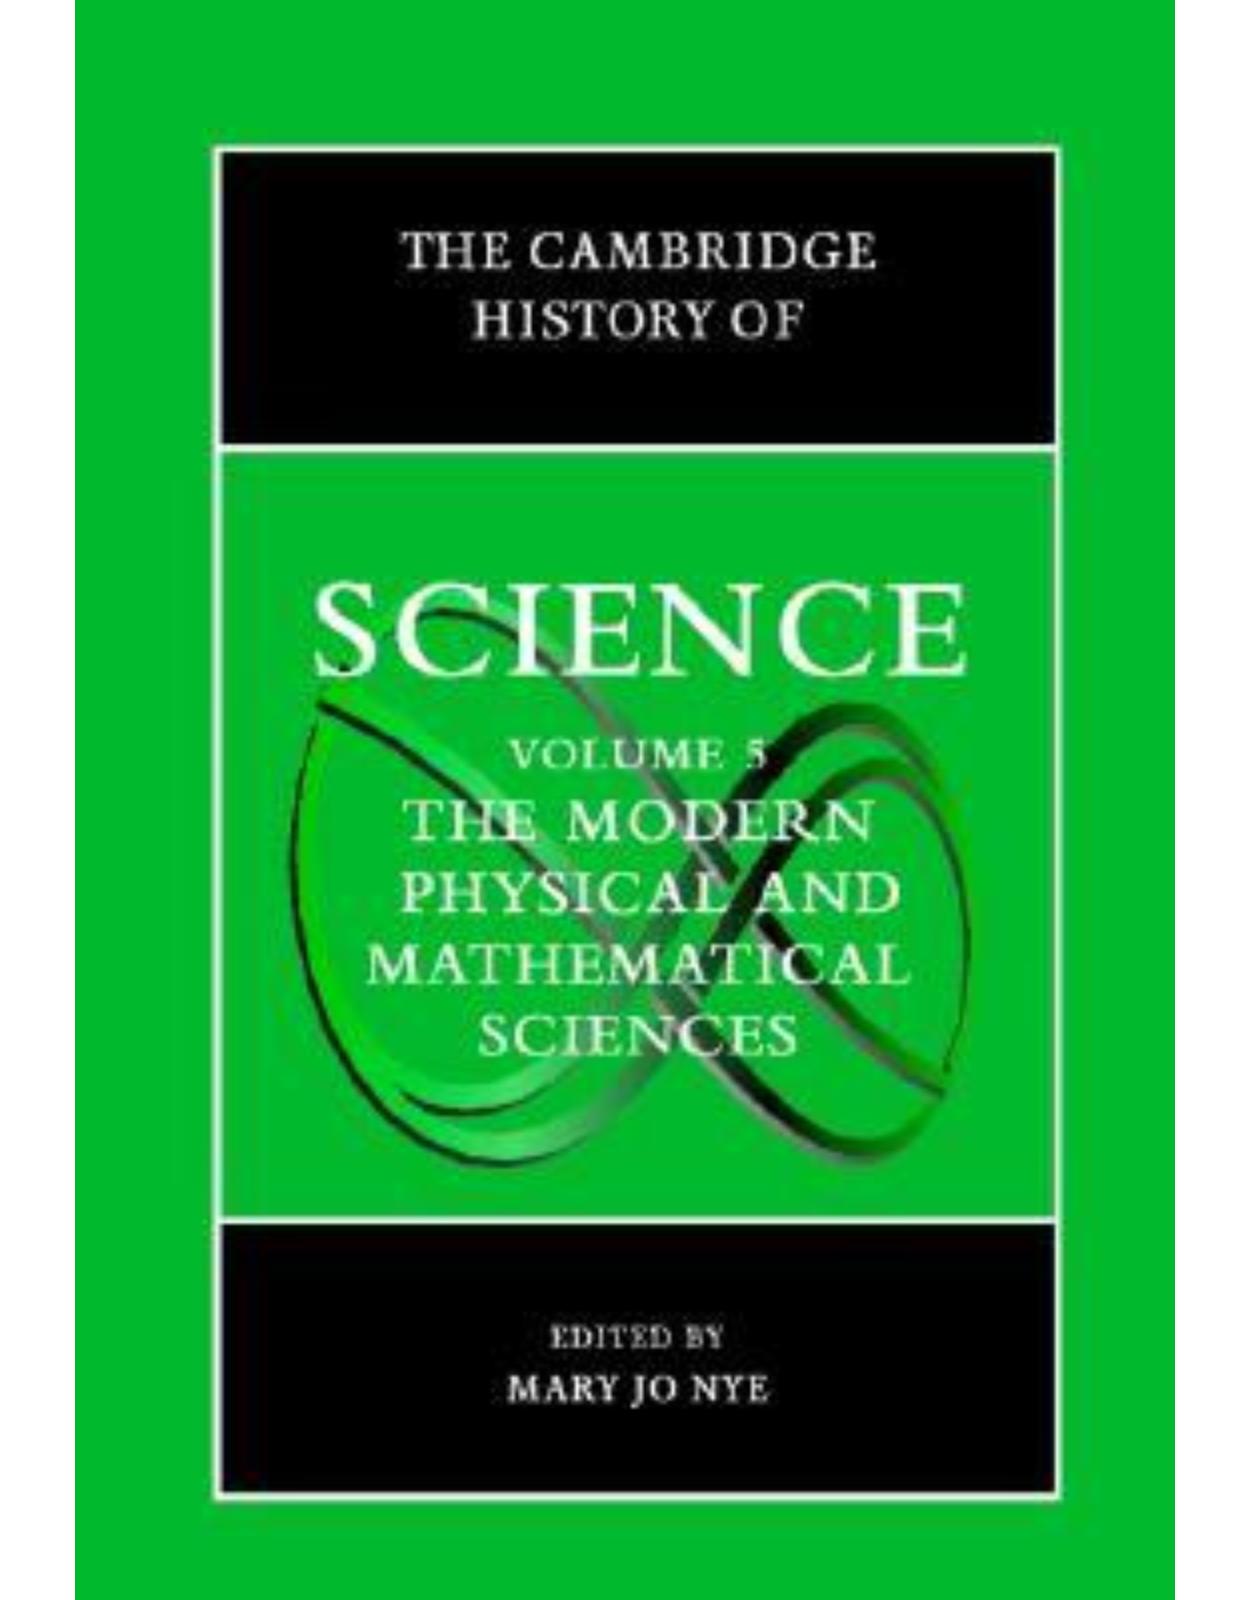 The Cambridge History of Science: Volume 5, The Modern Physical and Mathematical Sciences: Modern Physical and Mathematical Sciences 